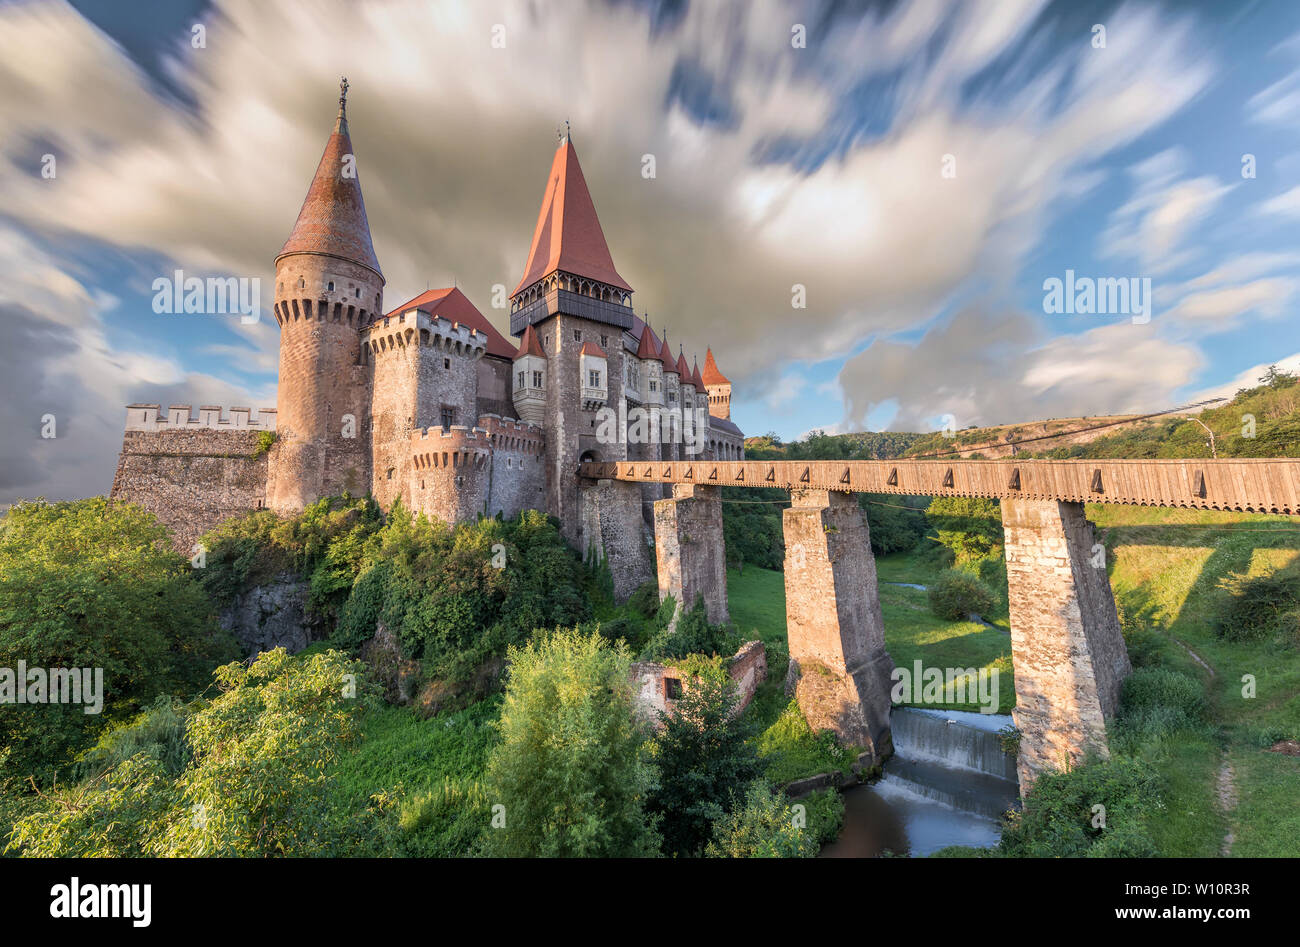 What a great place! What a beauty! What an impressive fortress! What a strong bridge! What a vegetation around! What a perfect frame! The latter perfe Stock Photo